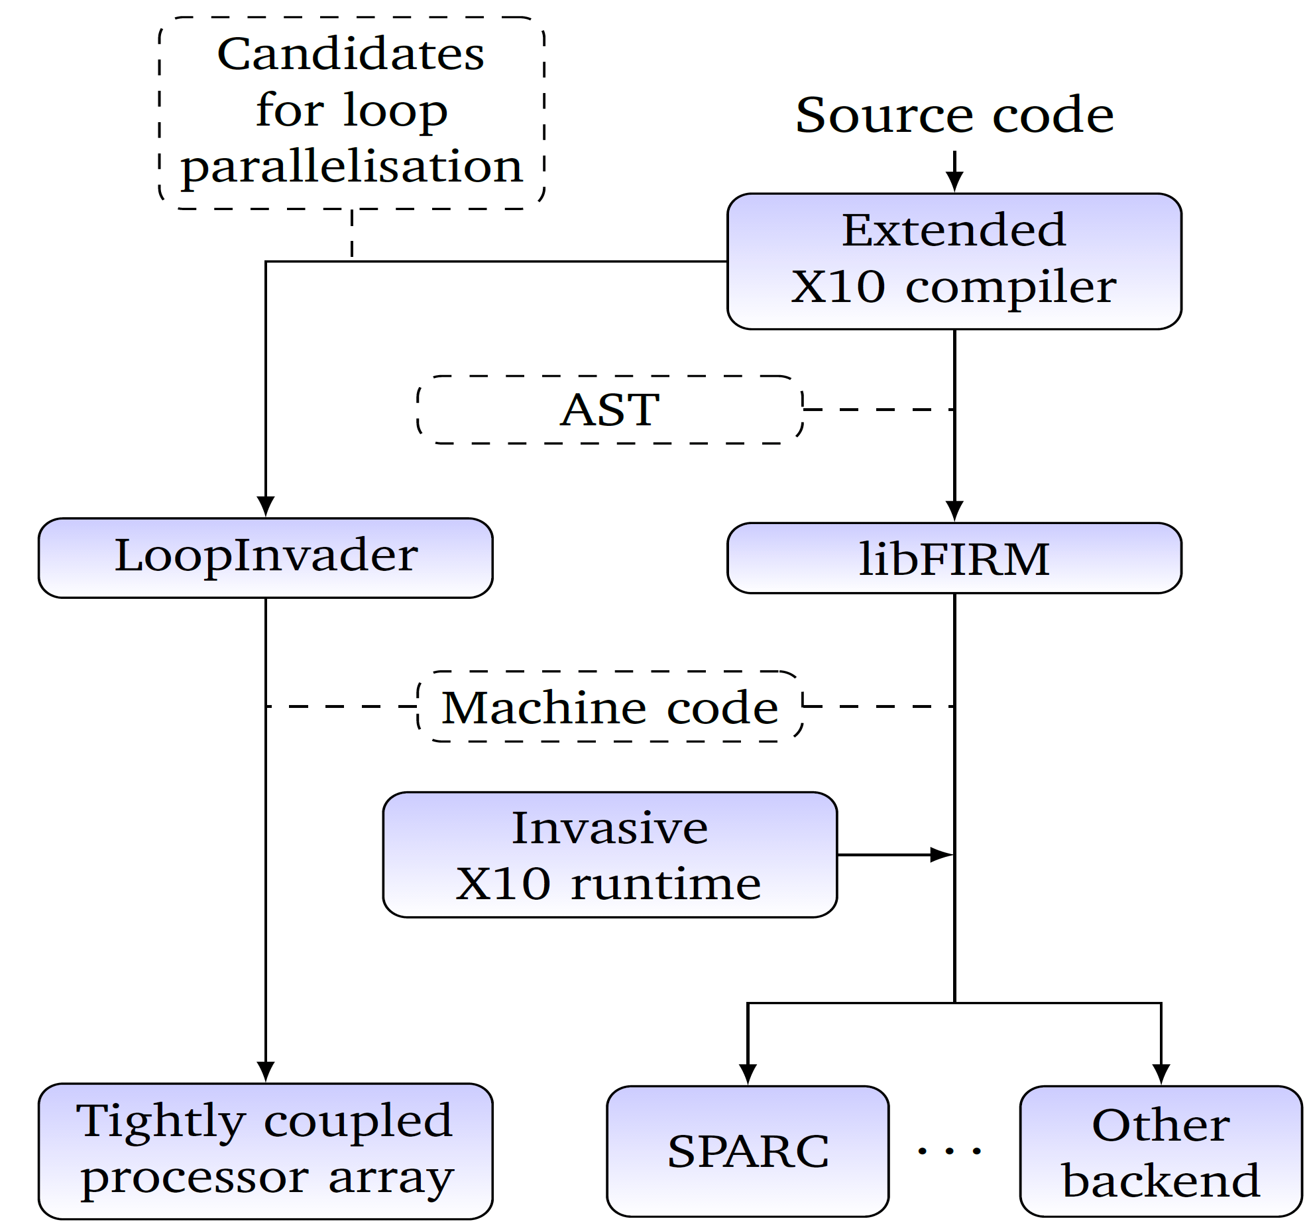 Overview of the compiler framework for invasive computing.